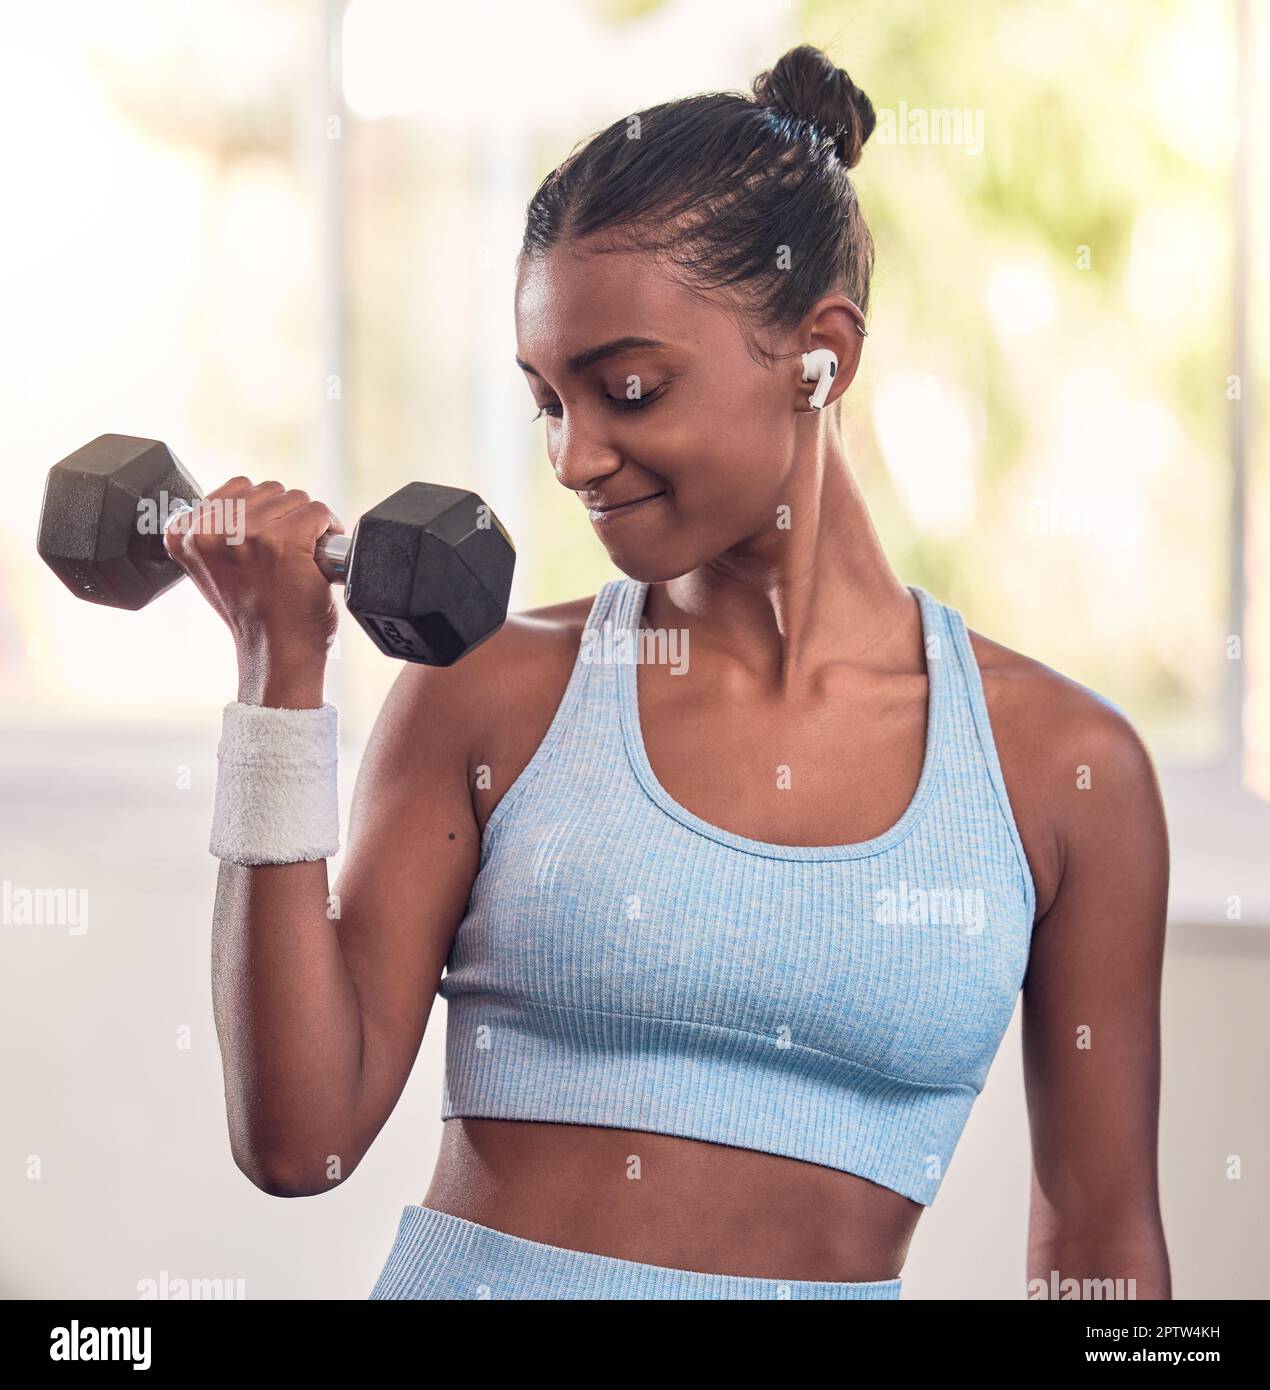 Woman, dumbbell and music earphones in gym workout, training and exercise for strong arm muscles, body goals or strength target. Indian athlete, perso Stock Photo